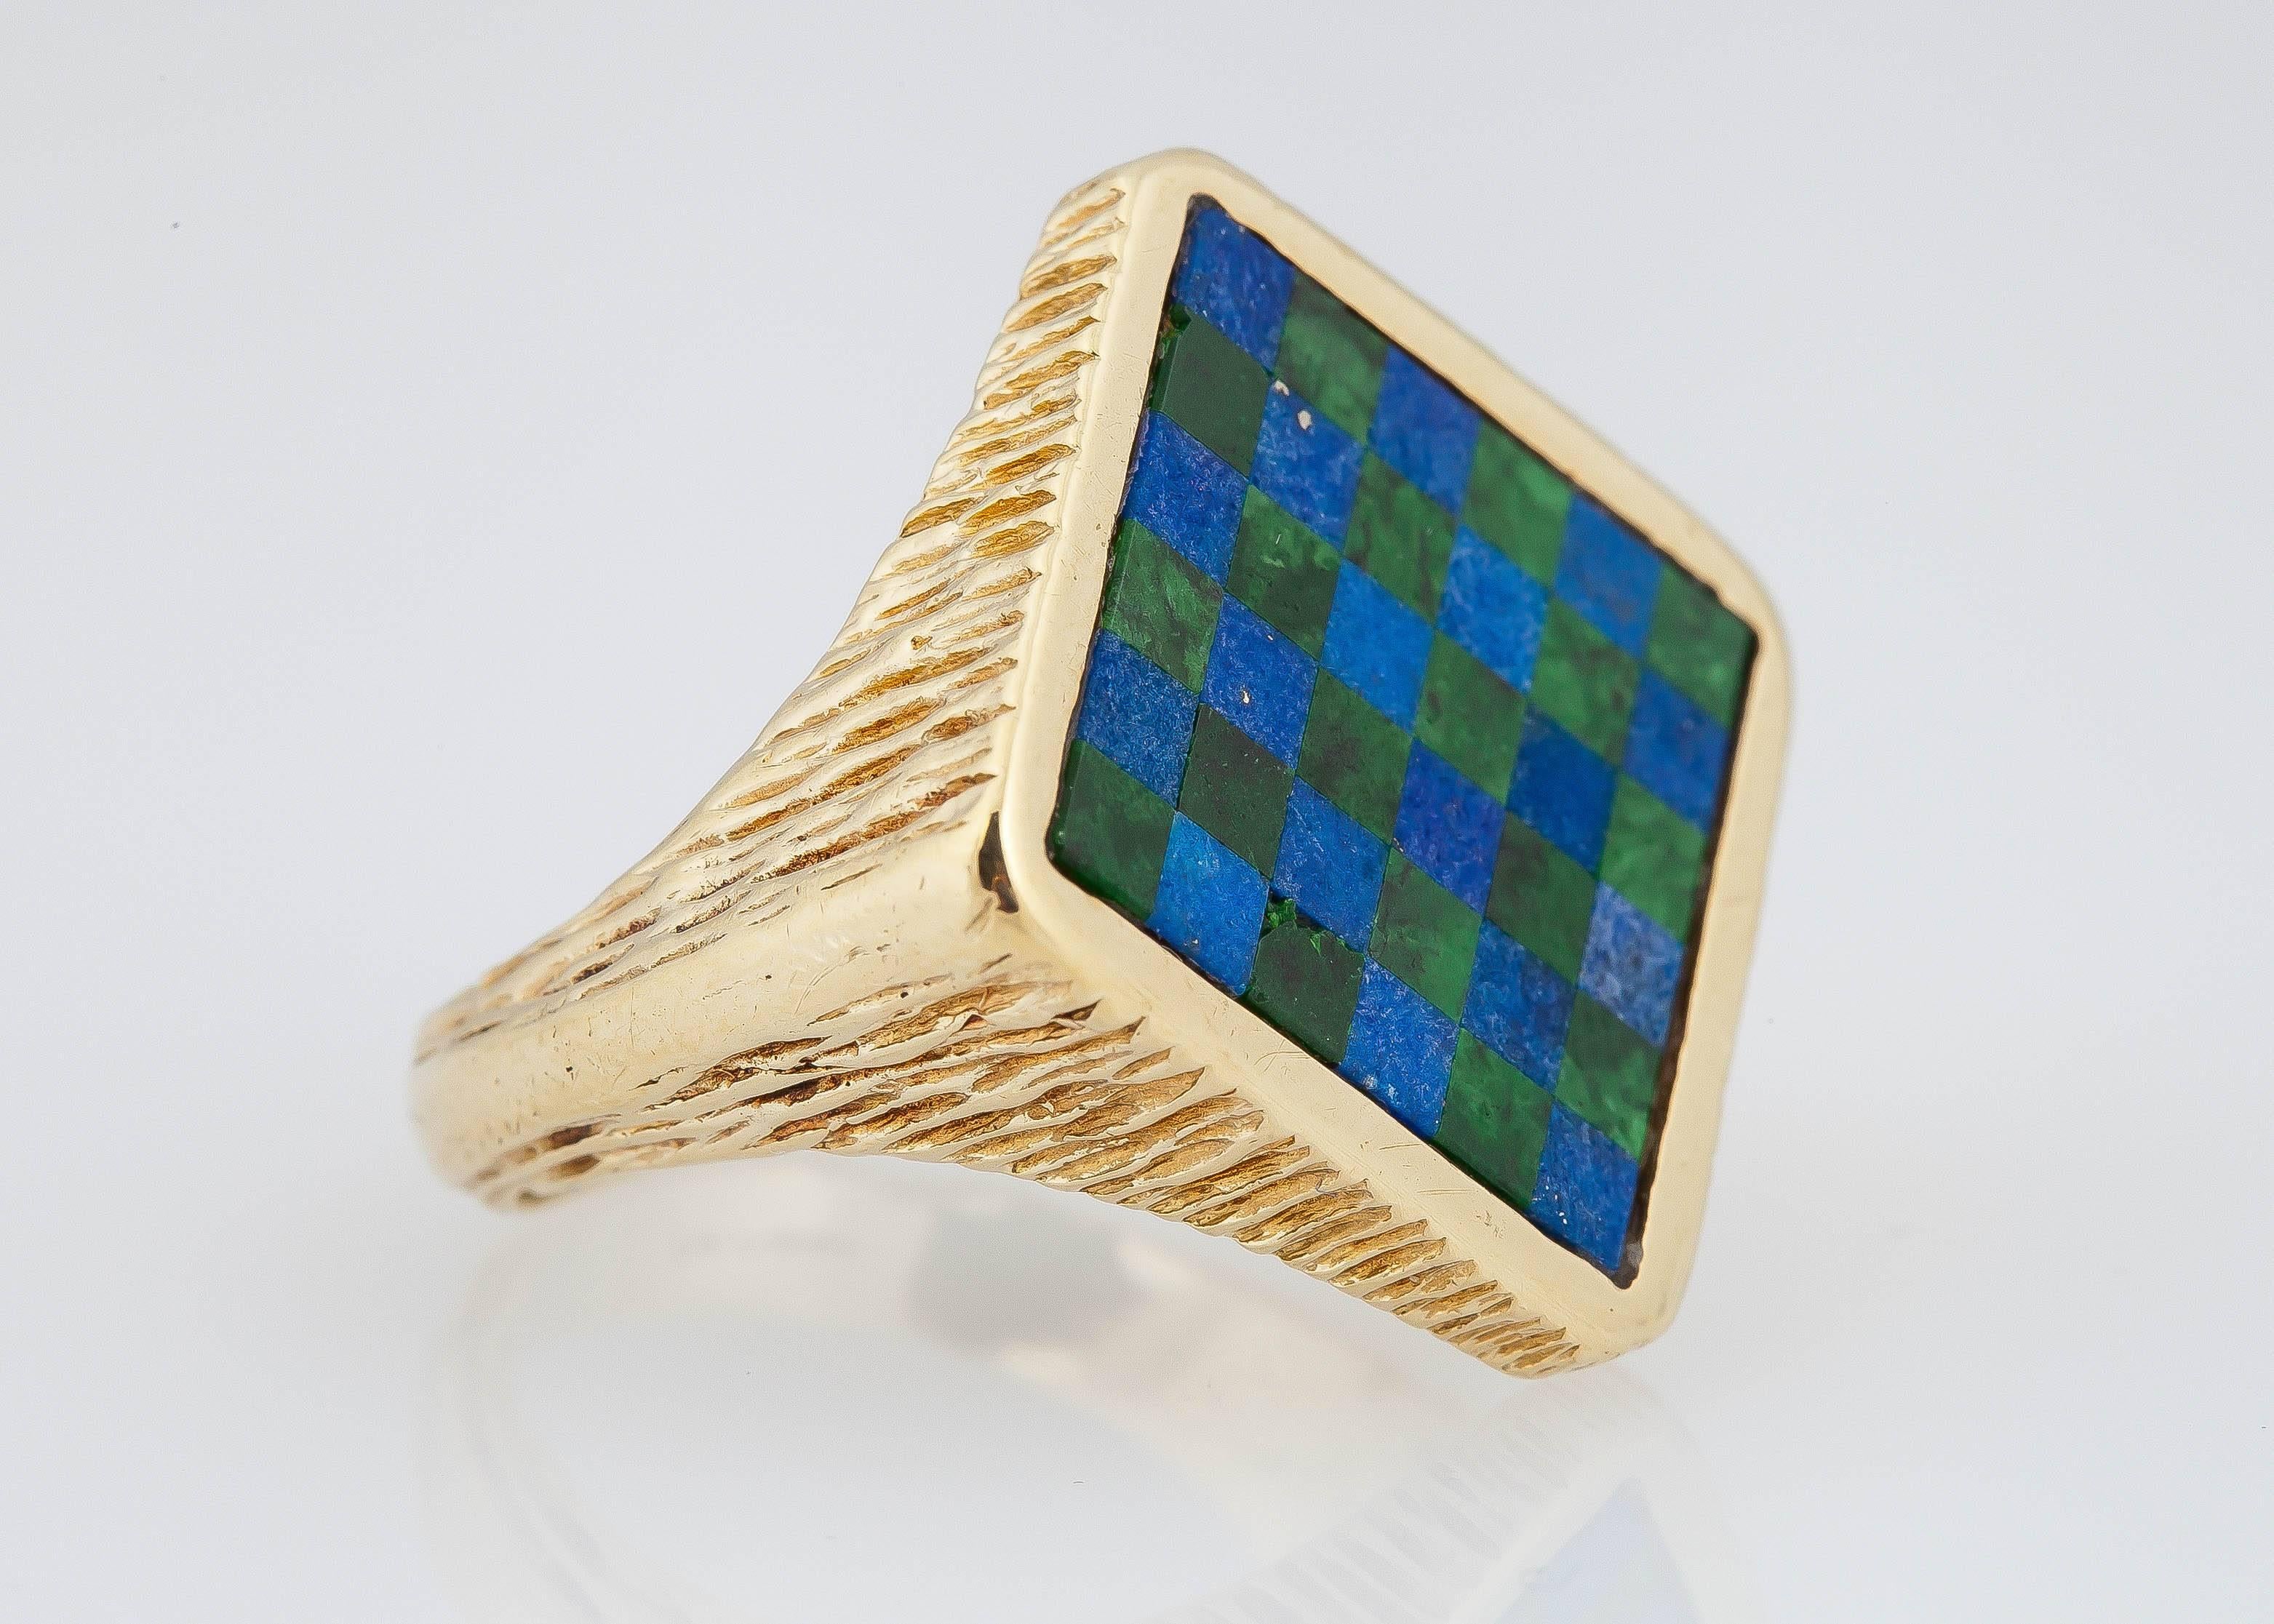 VIntage TIFFANY Checkerboard 14k Gold Ring, Lapis , Size 8.5(easily sizable), great pinky ring